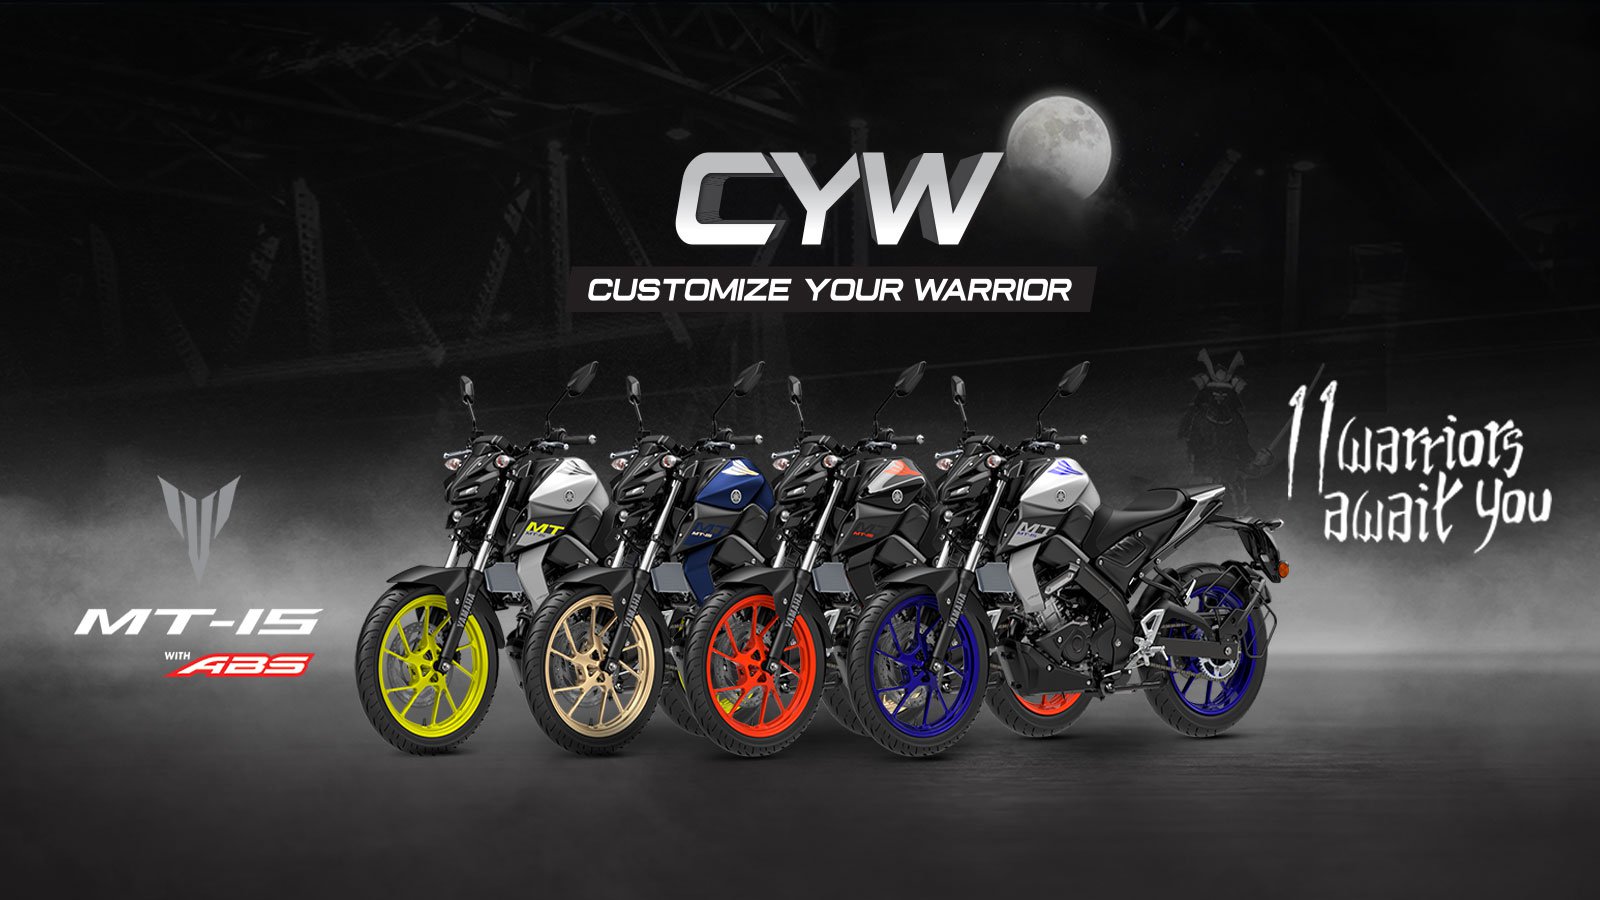 Yamaha’s introduces “Customize your warrior” Campaign for MT 15